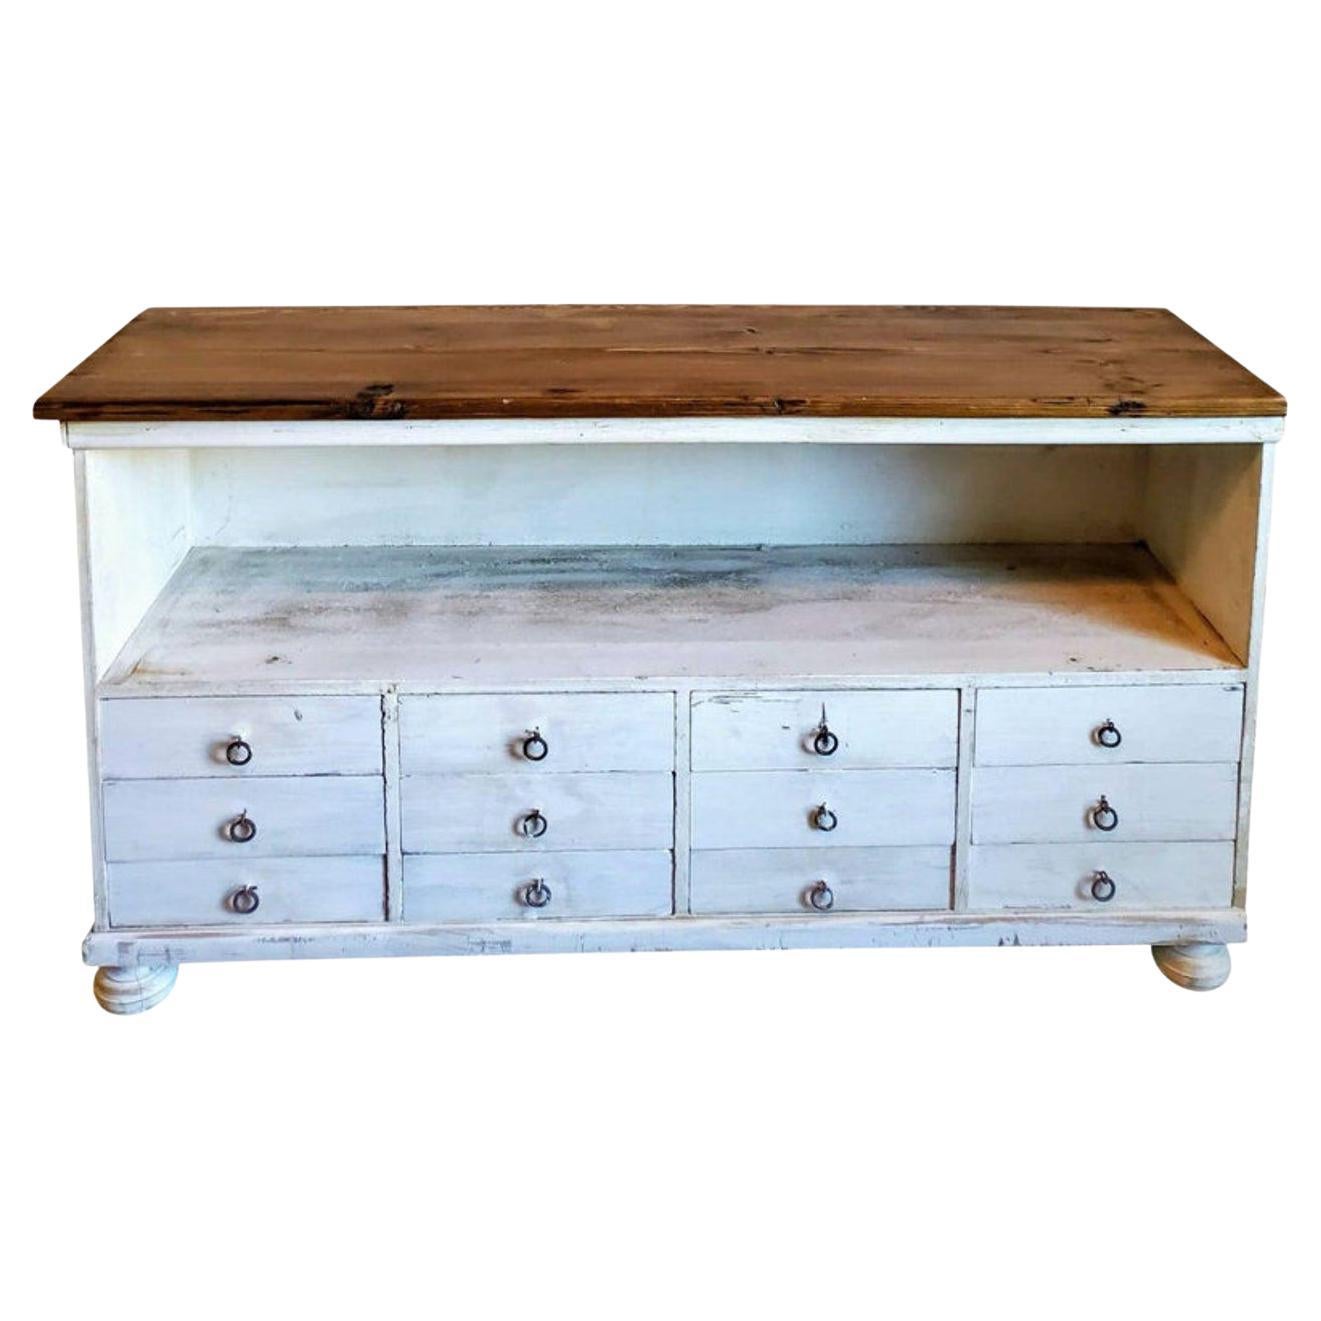 Antique American Country General Store Counter